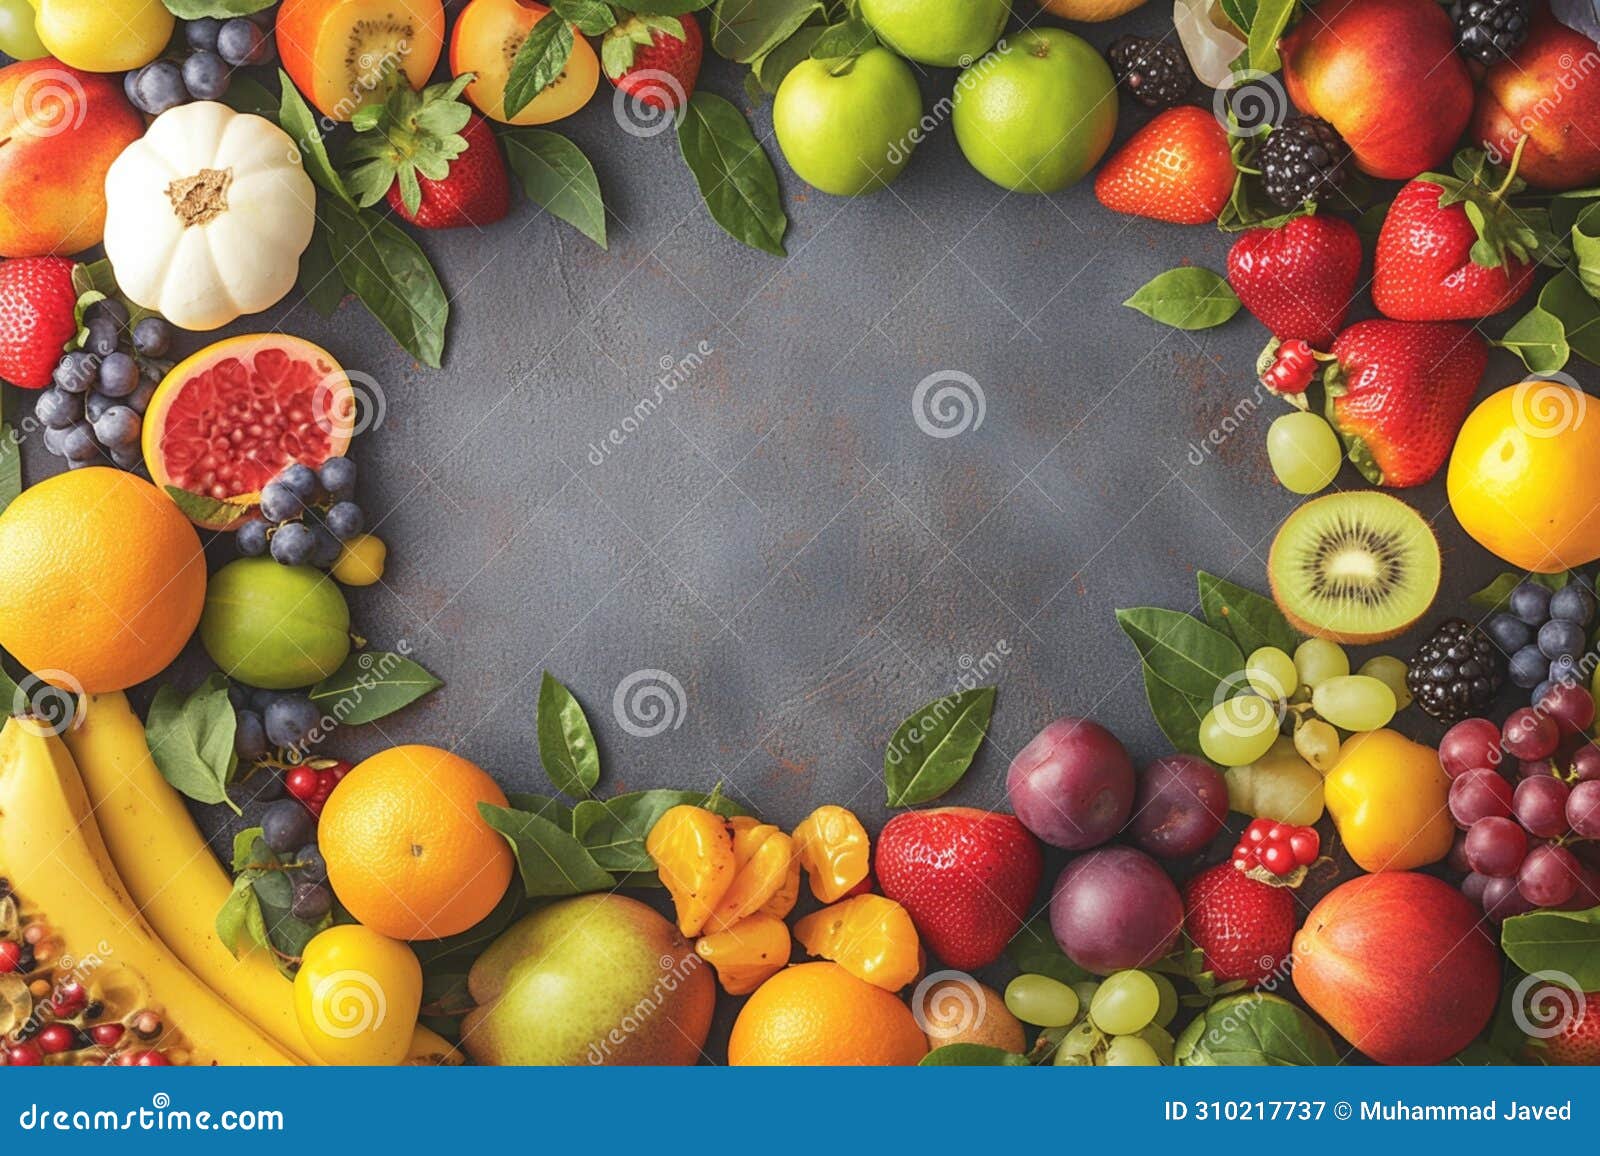 healthful mix fresh and diverse array of fruits and berries